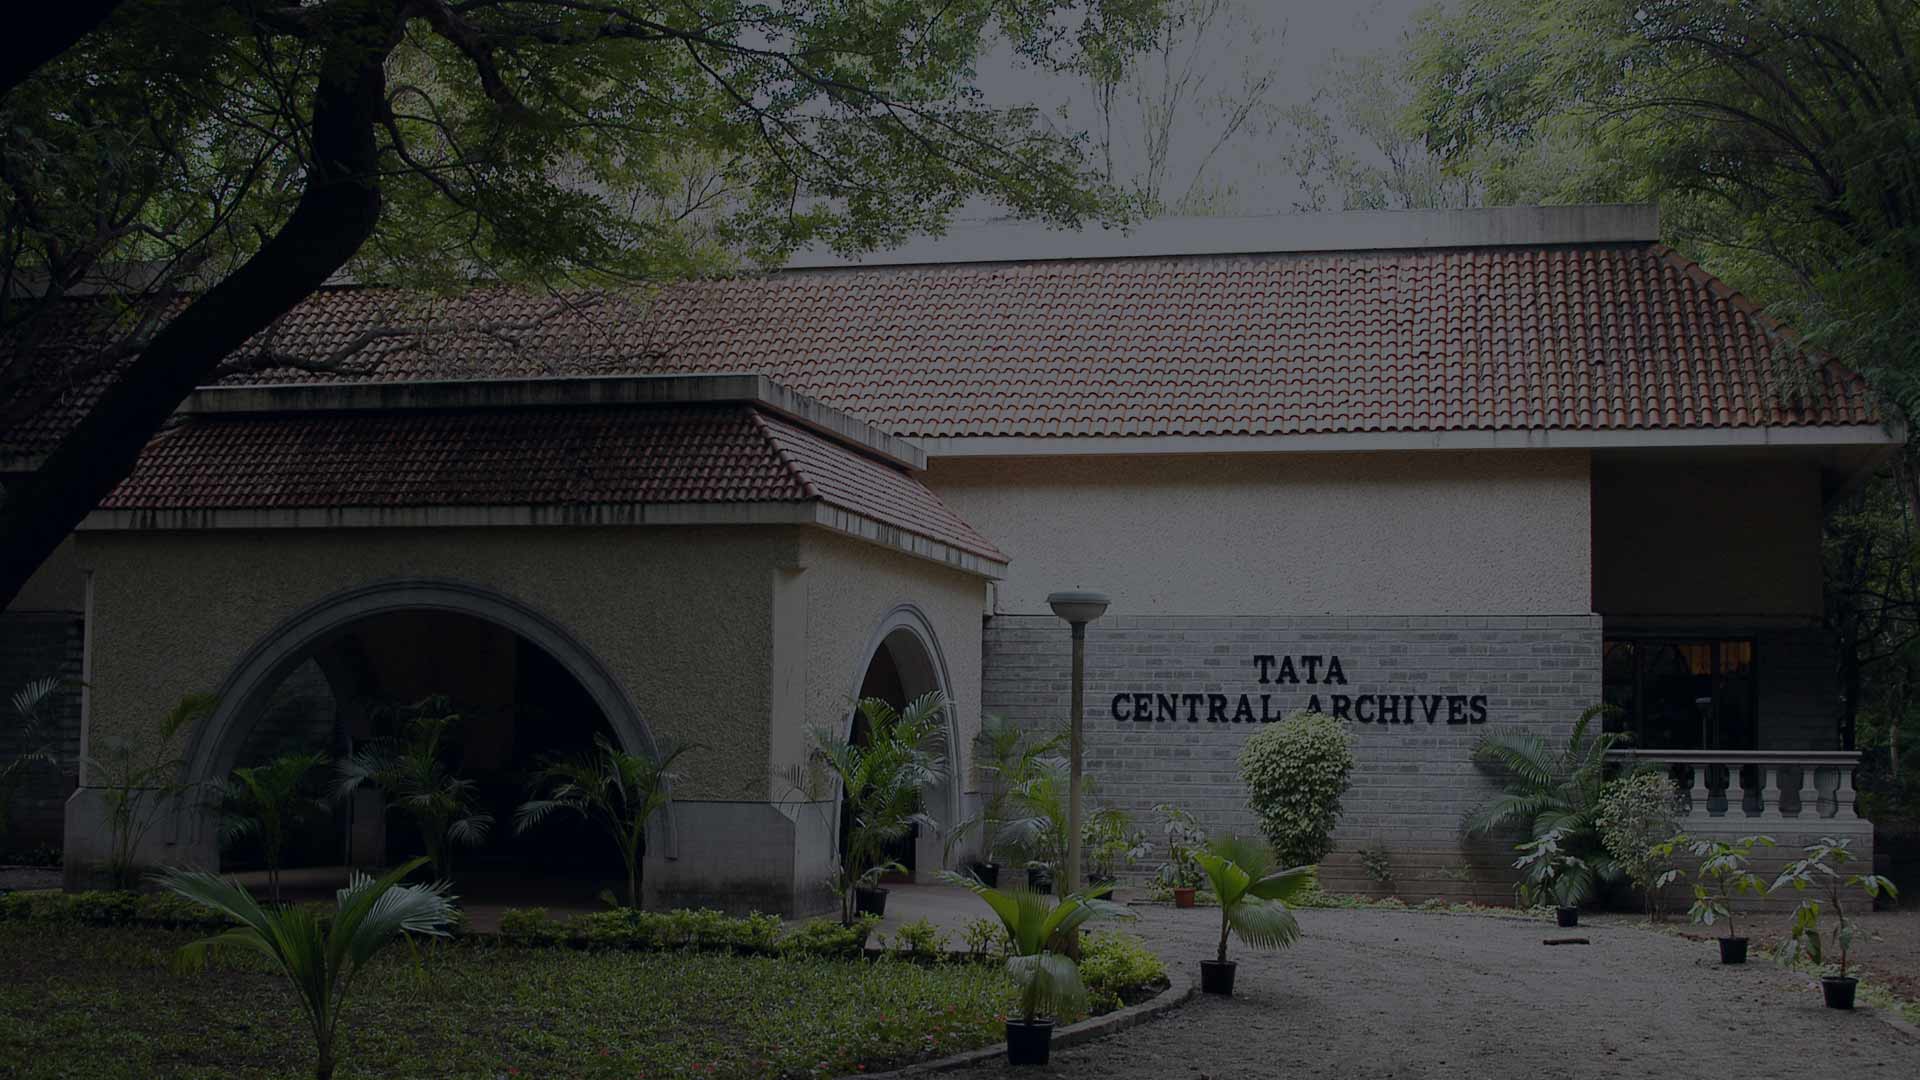 The Tata Central Archives preserve the group's history